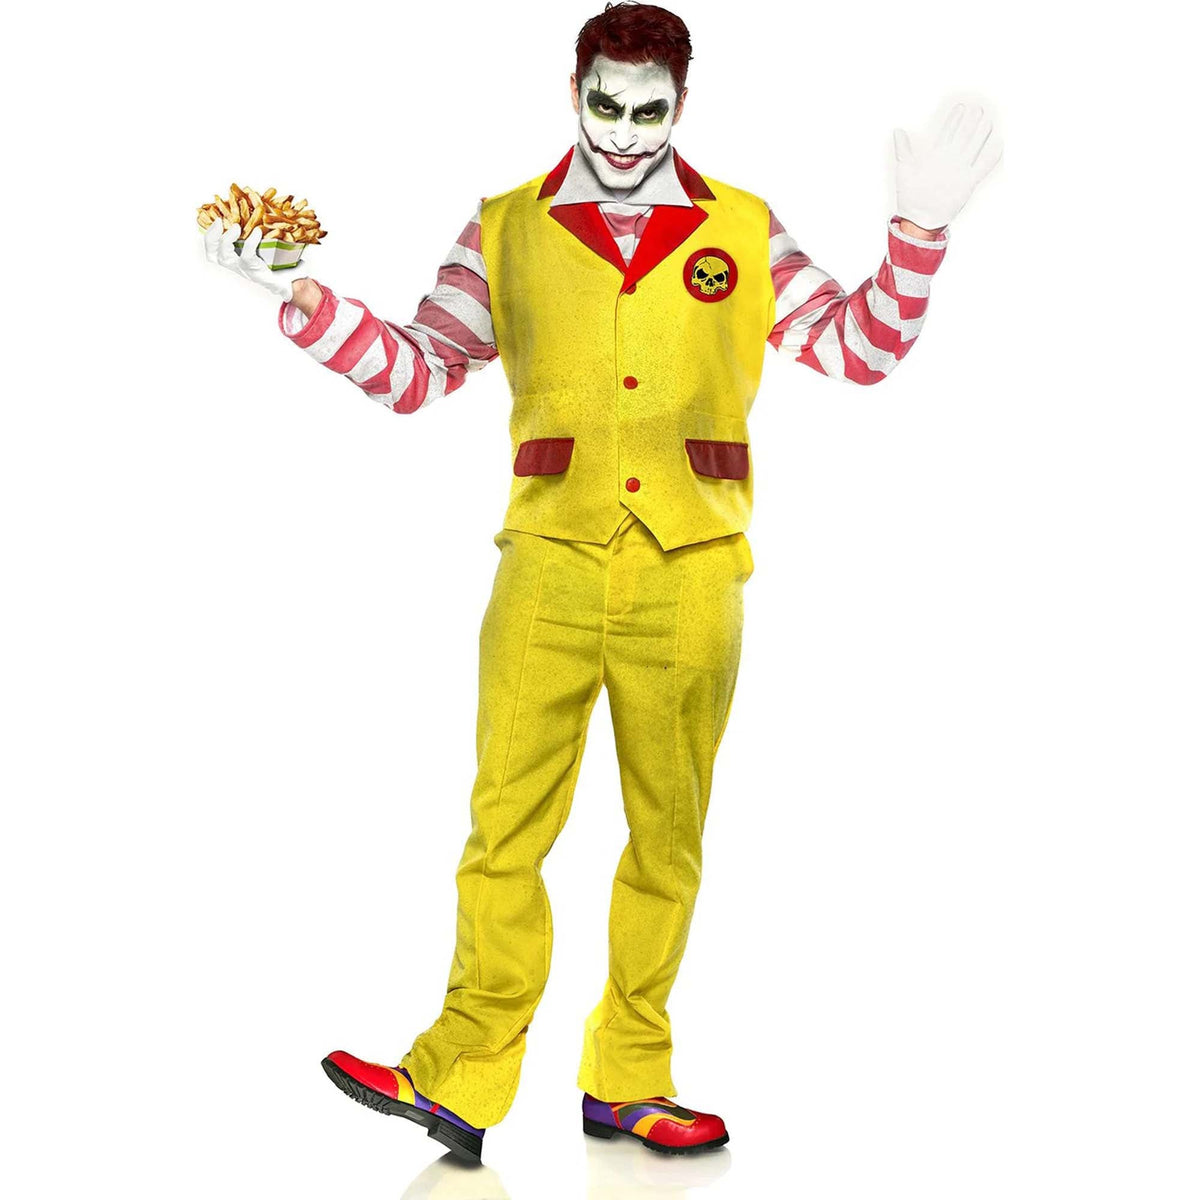 Seeing Red Inc. Costumes Evil Fast Food Clown Costume for Adults, Vest with Sleeves